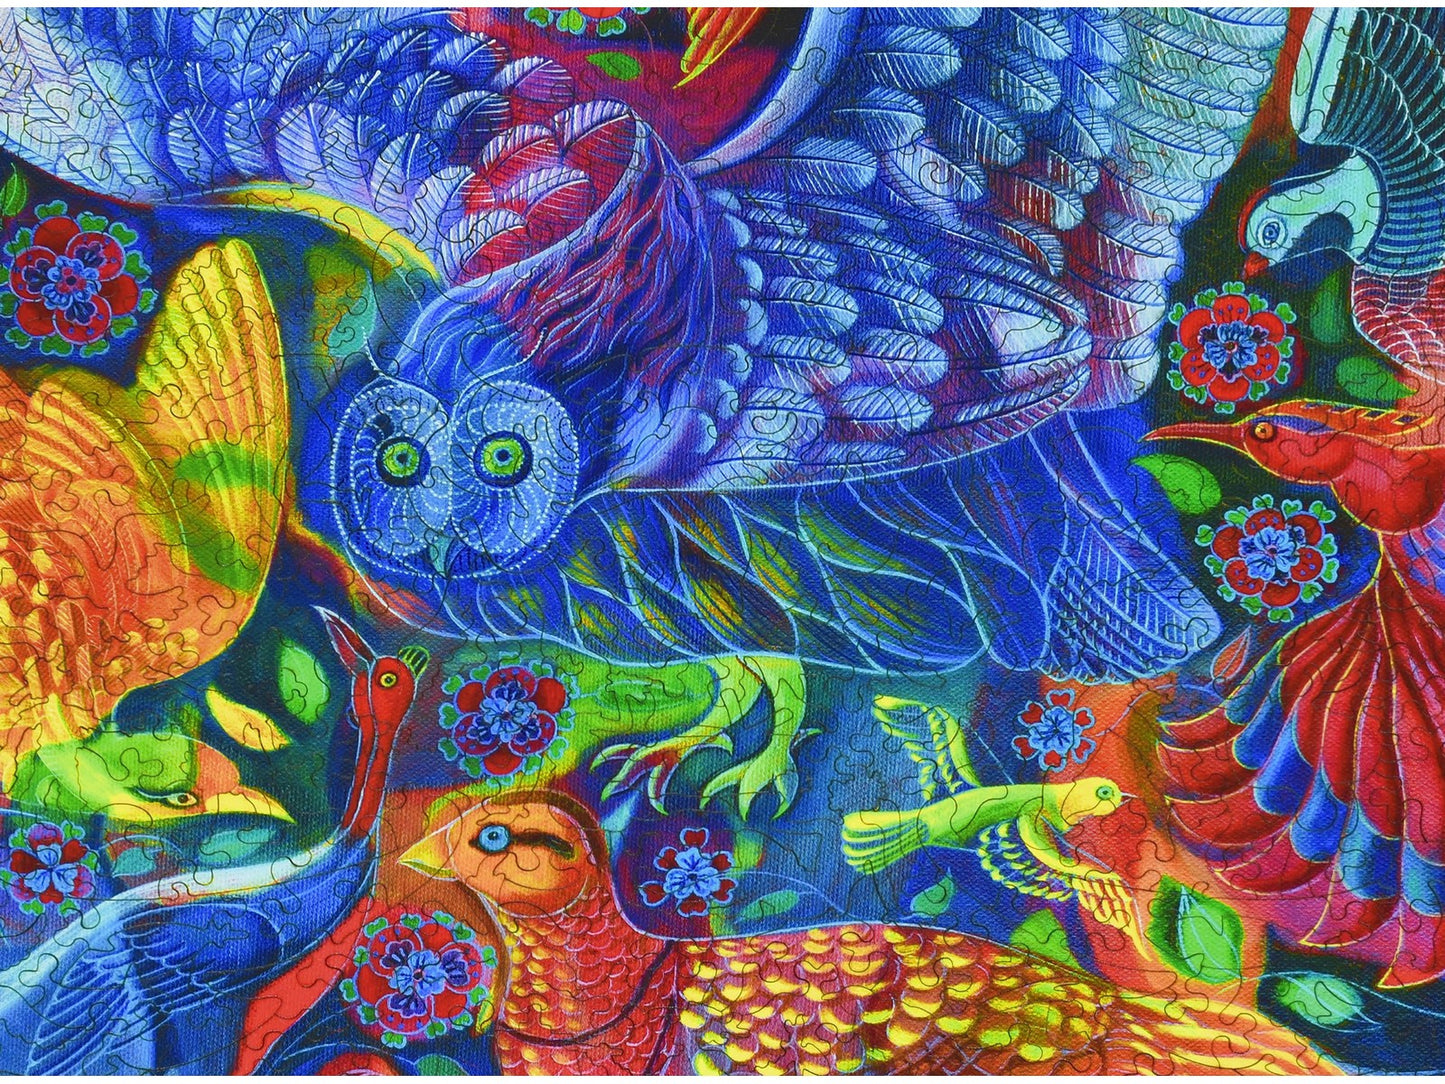 A closeup of the front of the puzzle, Birds, showing the detail in the pieces.